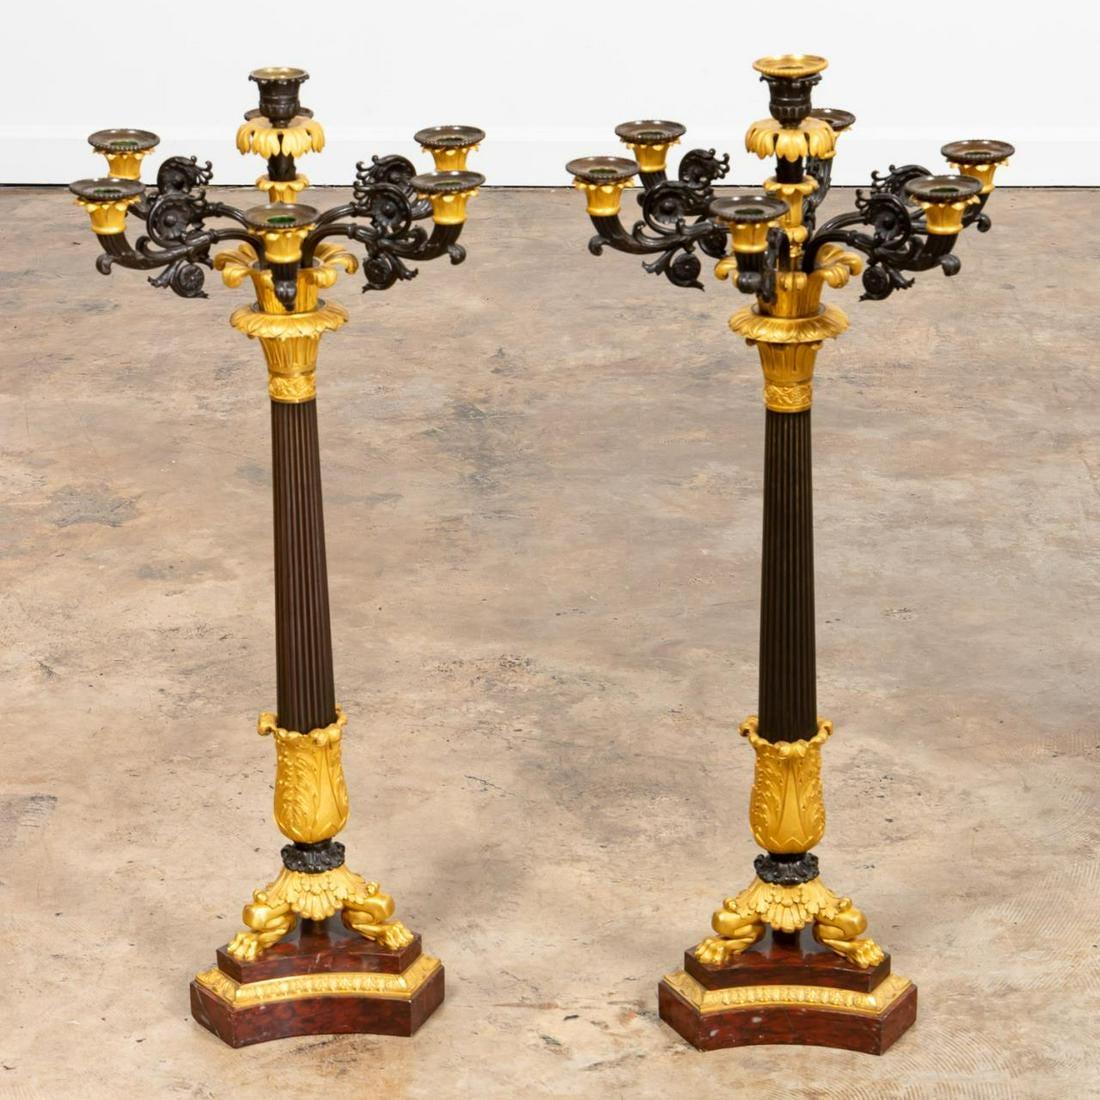 Pair of Gilt Bronze Candlesticks on Marble For Sale 2